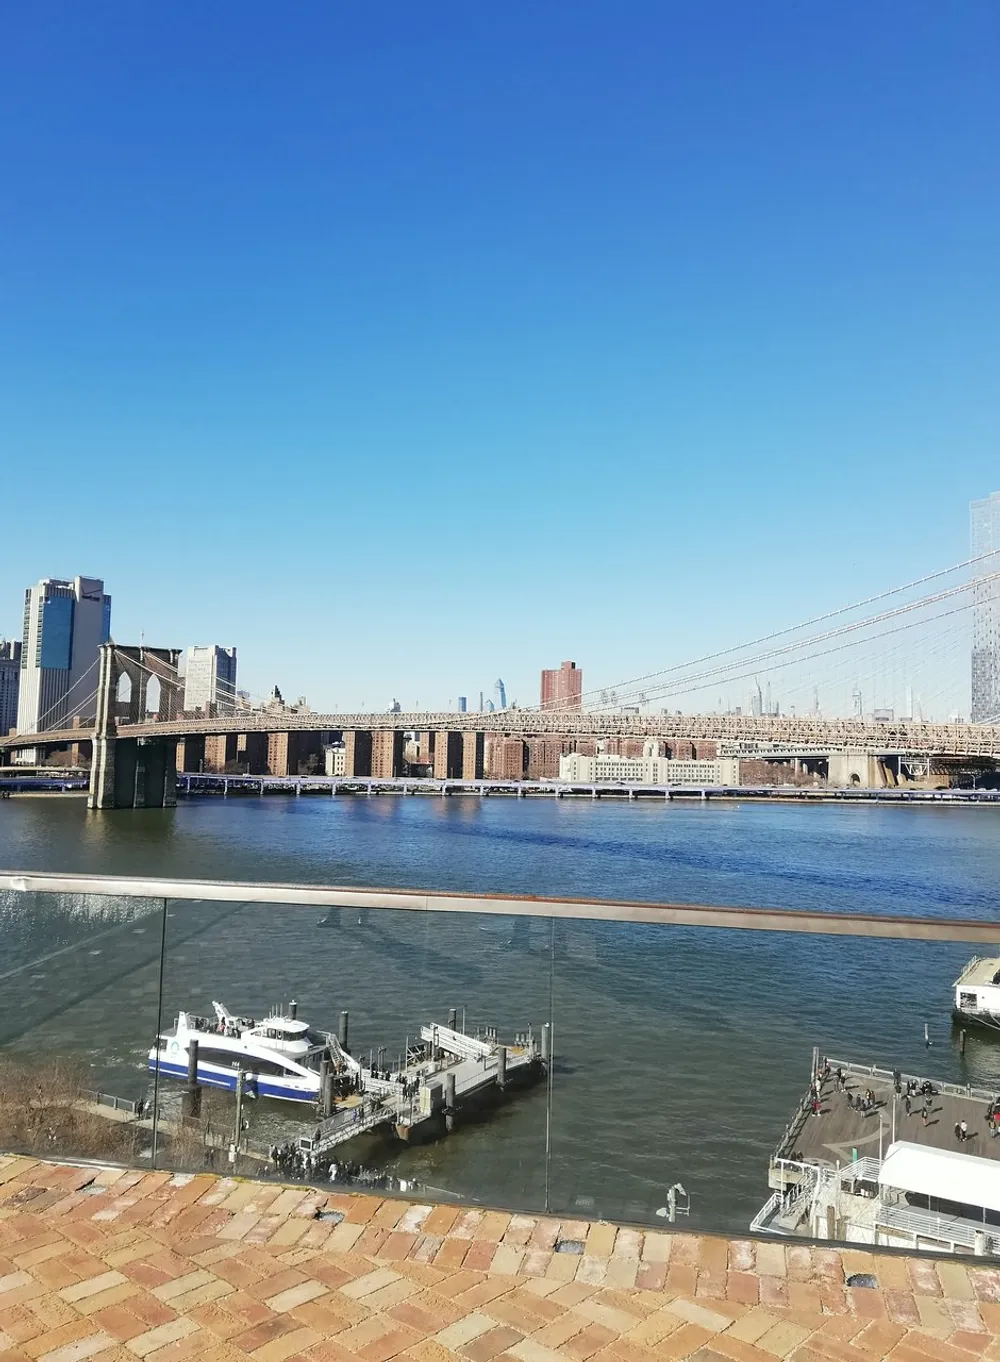 This image captures a sunny day view of a bridge over a river with docked boats and a city skyline in the background